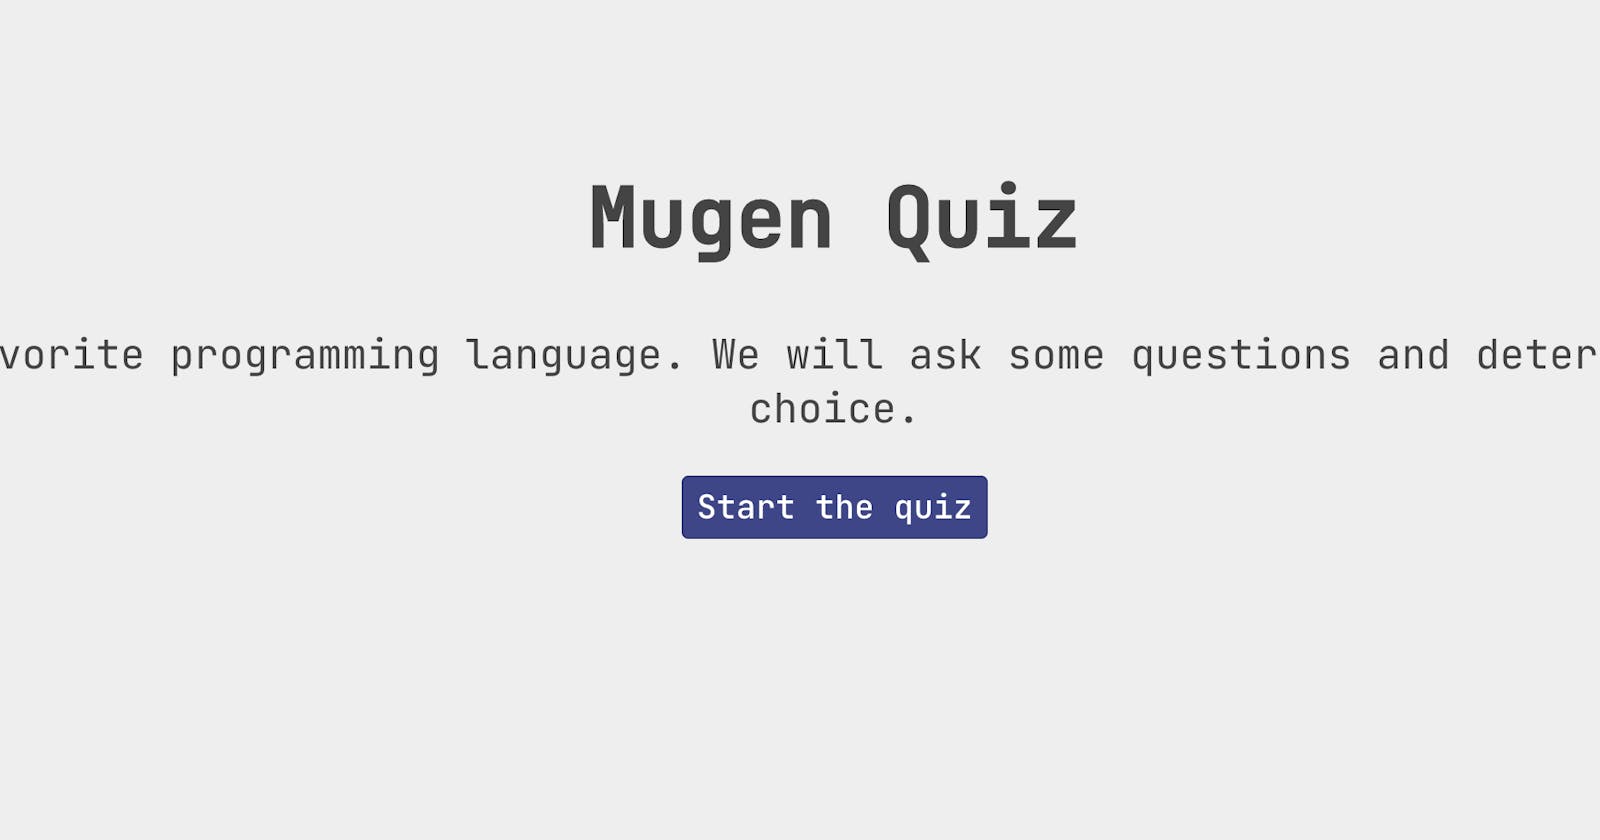 This is how I built Mugen Quiz, an April Fool's day project.